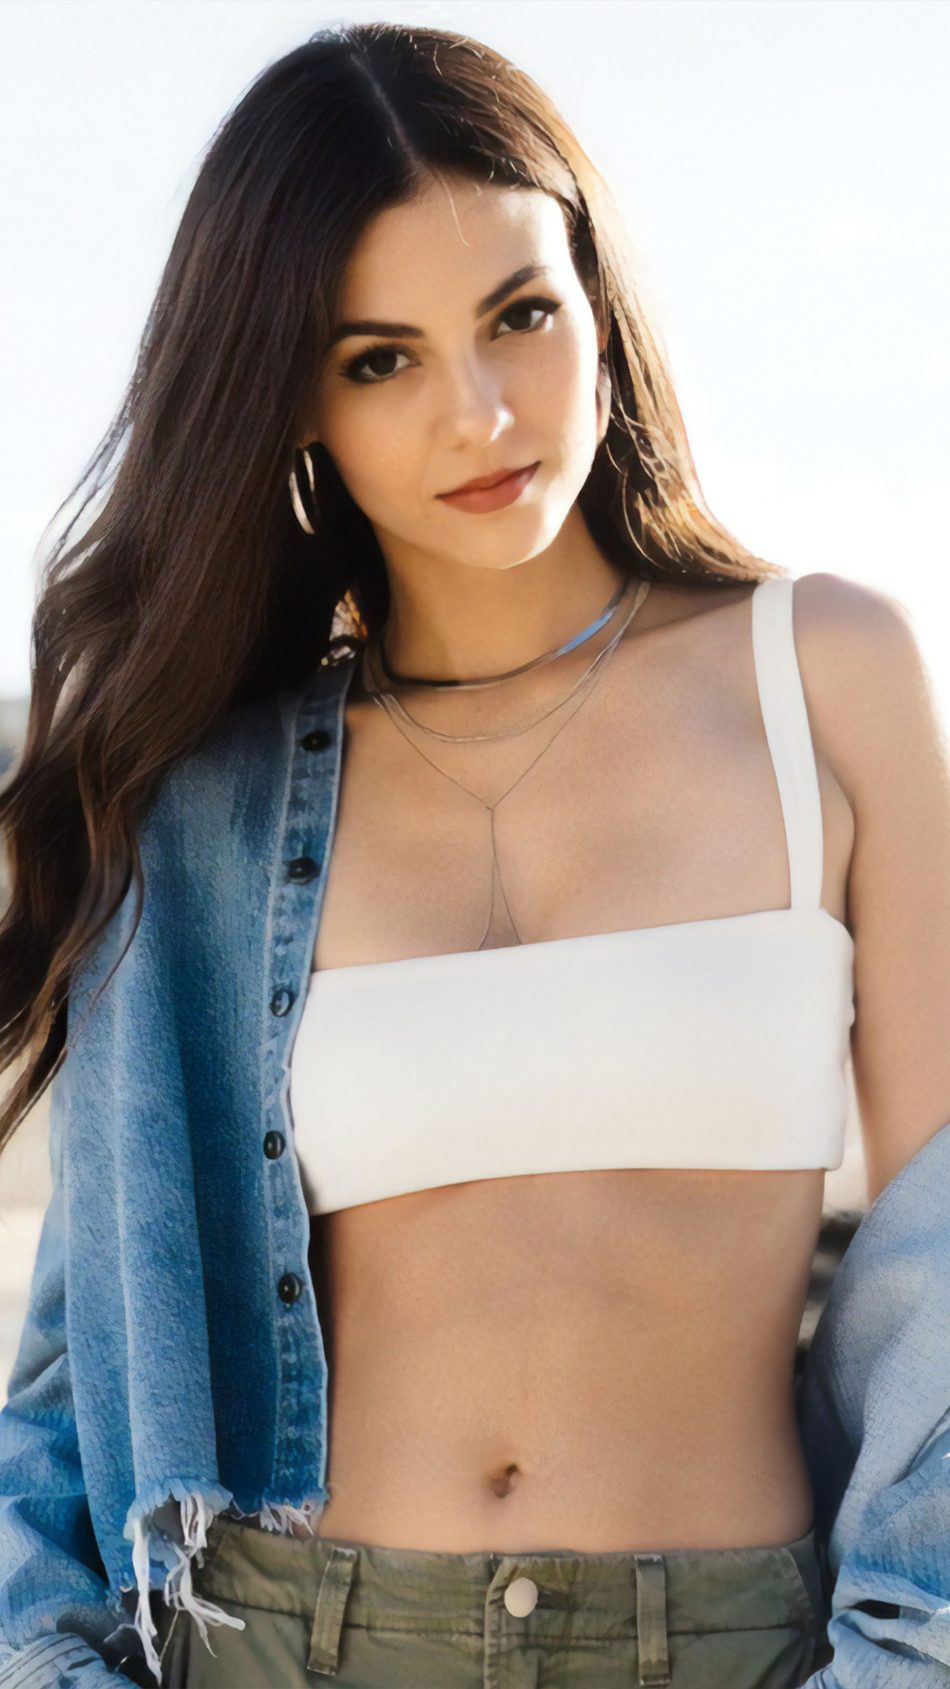 Gorgeous Victoria Justice Photoshoot 2019 4k Ultra - Victoria Justice Wallpaper 2019 - HD Wallpaper 